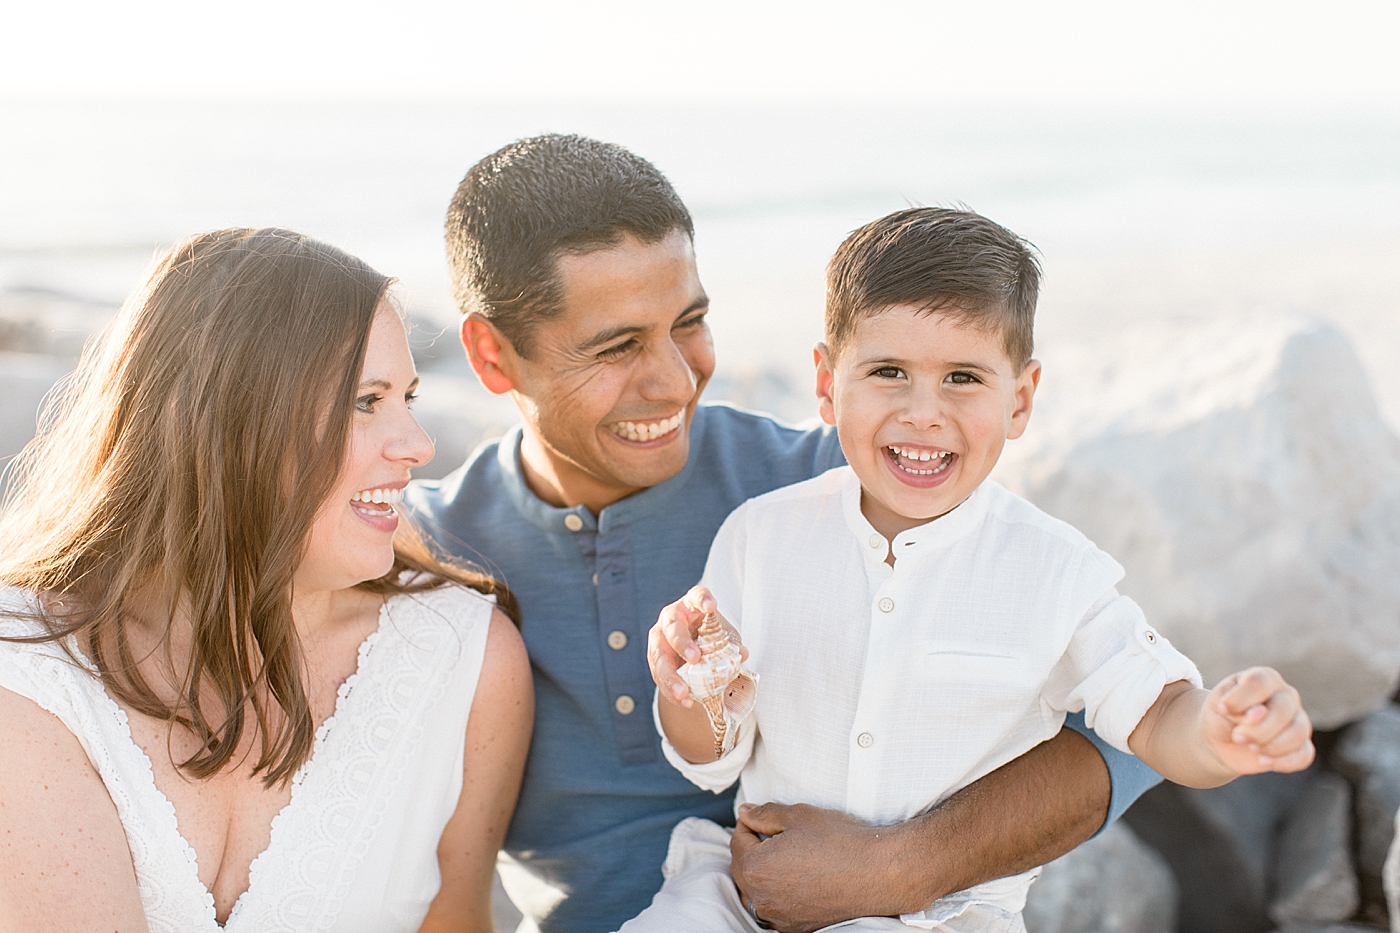 Sunset family session with Mom, Dad and son. Photos by Brittany Elise Photography.